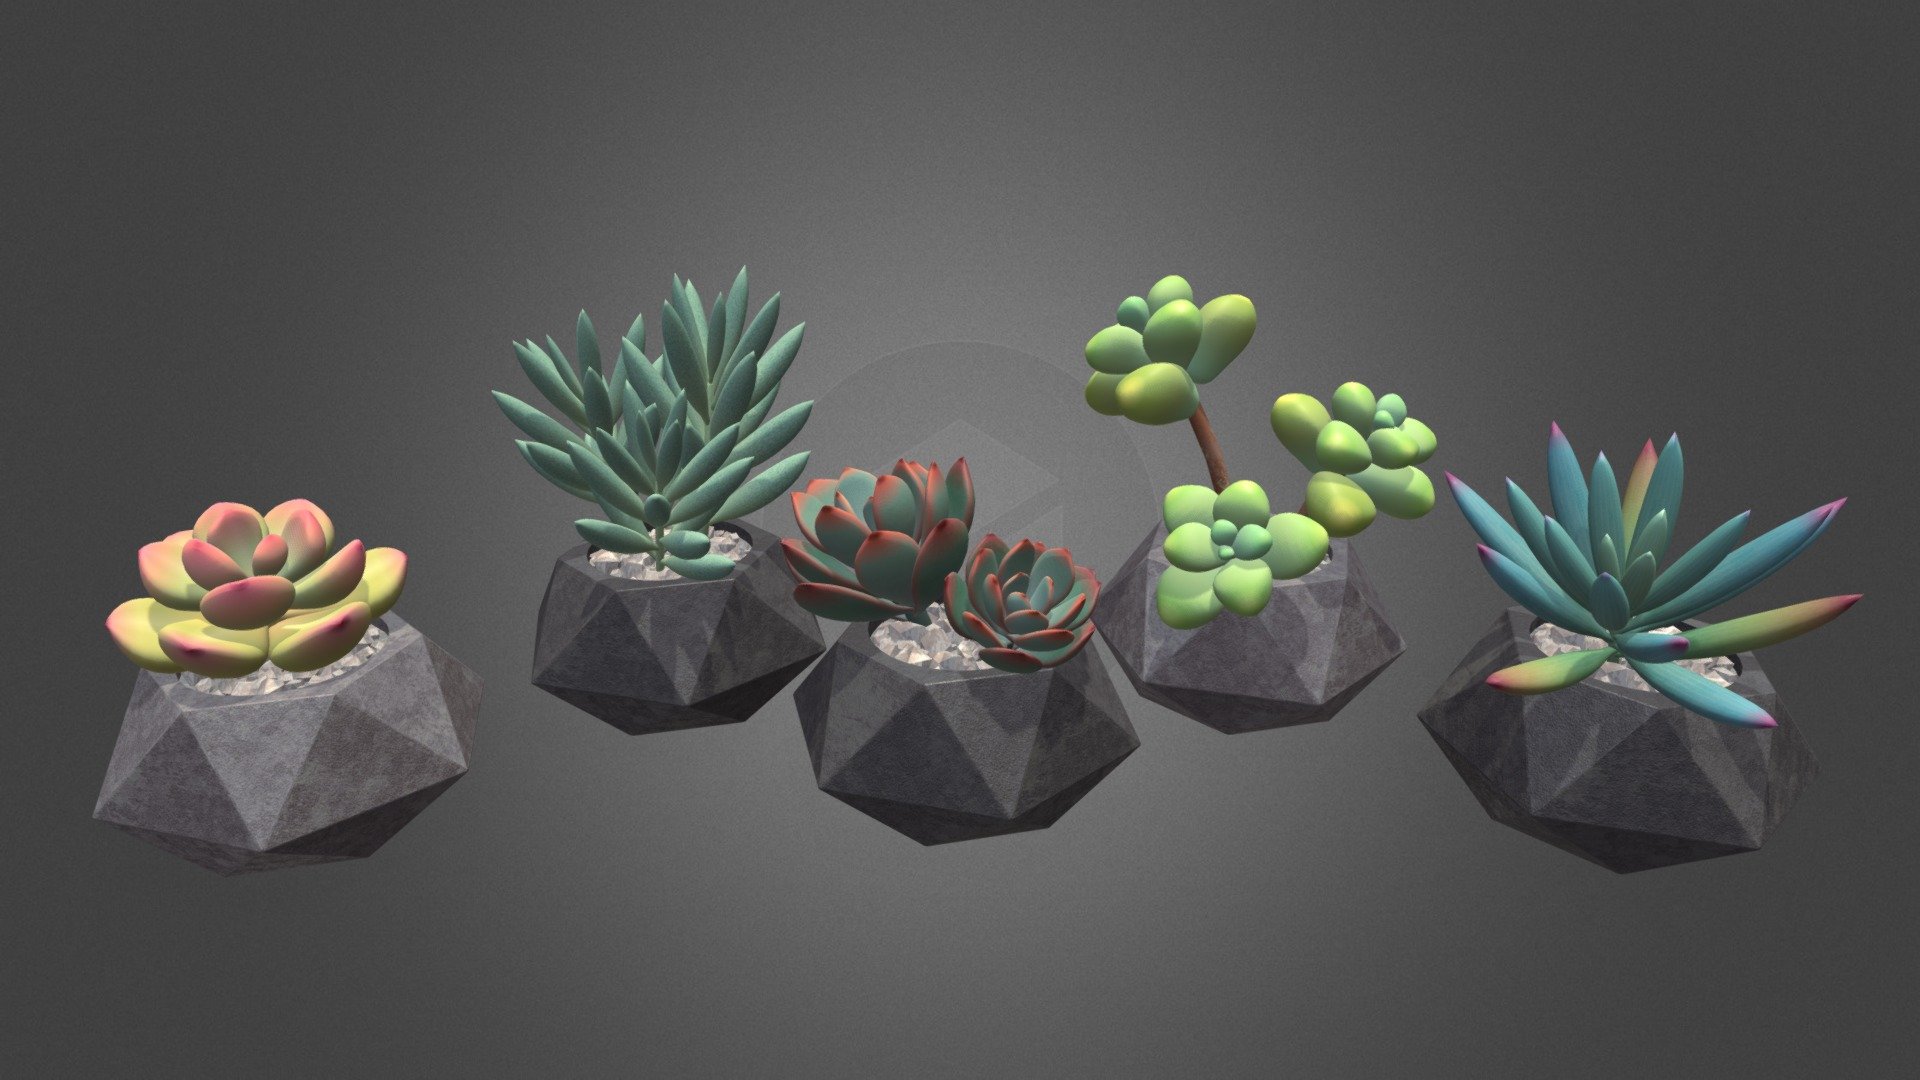 Detailed models of 5 house plants - succulents:
pink echeveria, silver senecio, blue echeveria, sedum and violet senecio.

Bright succulents in a trendy geometric pots will decorate any windowsill, desktop or shelf.
Recognizable plants will add realism to you game or 3D project)

Model consists of 114k triangles, uses detailed 1024*1024px textures and ready to use in formats blend and fbx.

If you want more succulents - look at my models https://sketchfab.com/tochechka/models 3d model